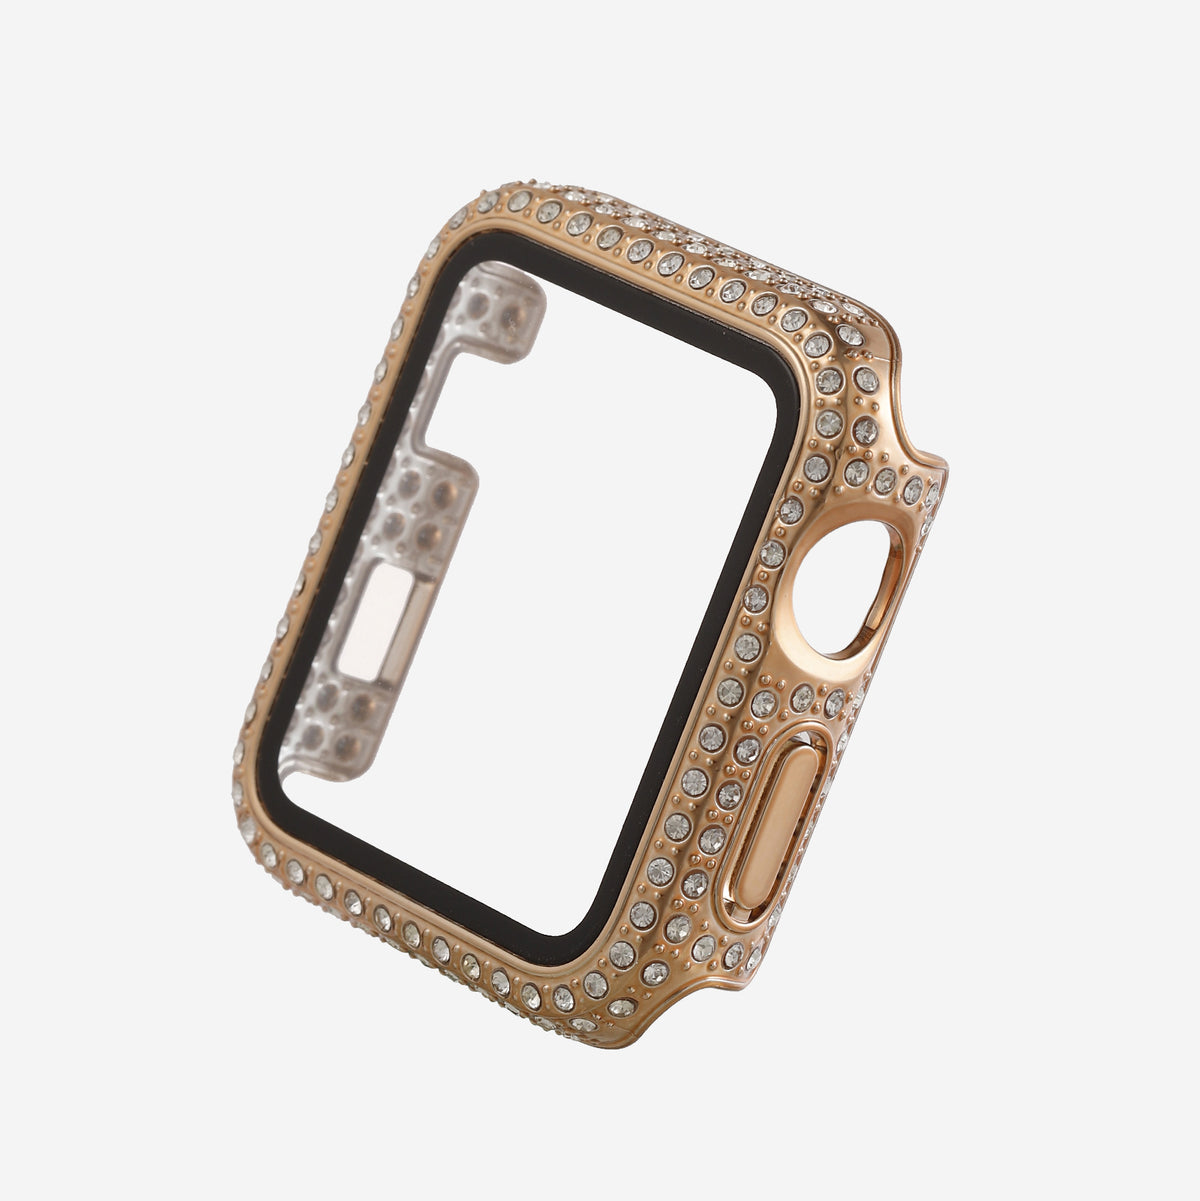 Apple Watch Crystal Screen Protector Case - Vintage Rose Gold